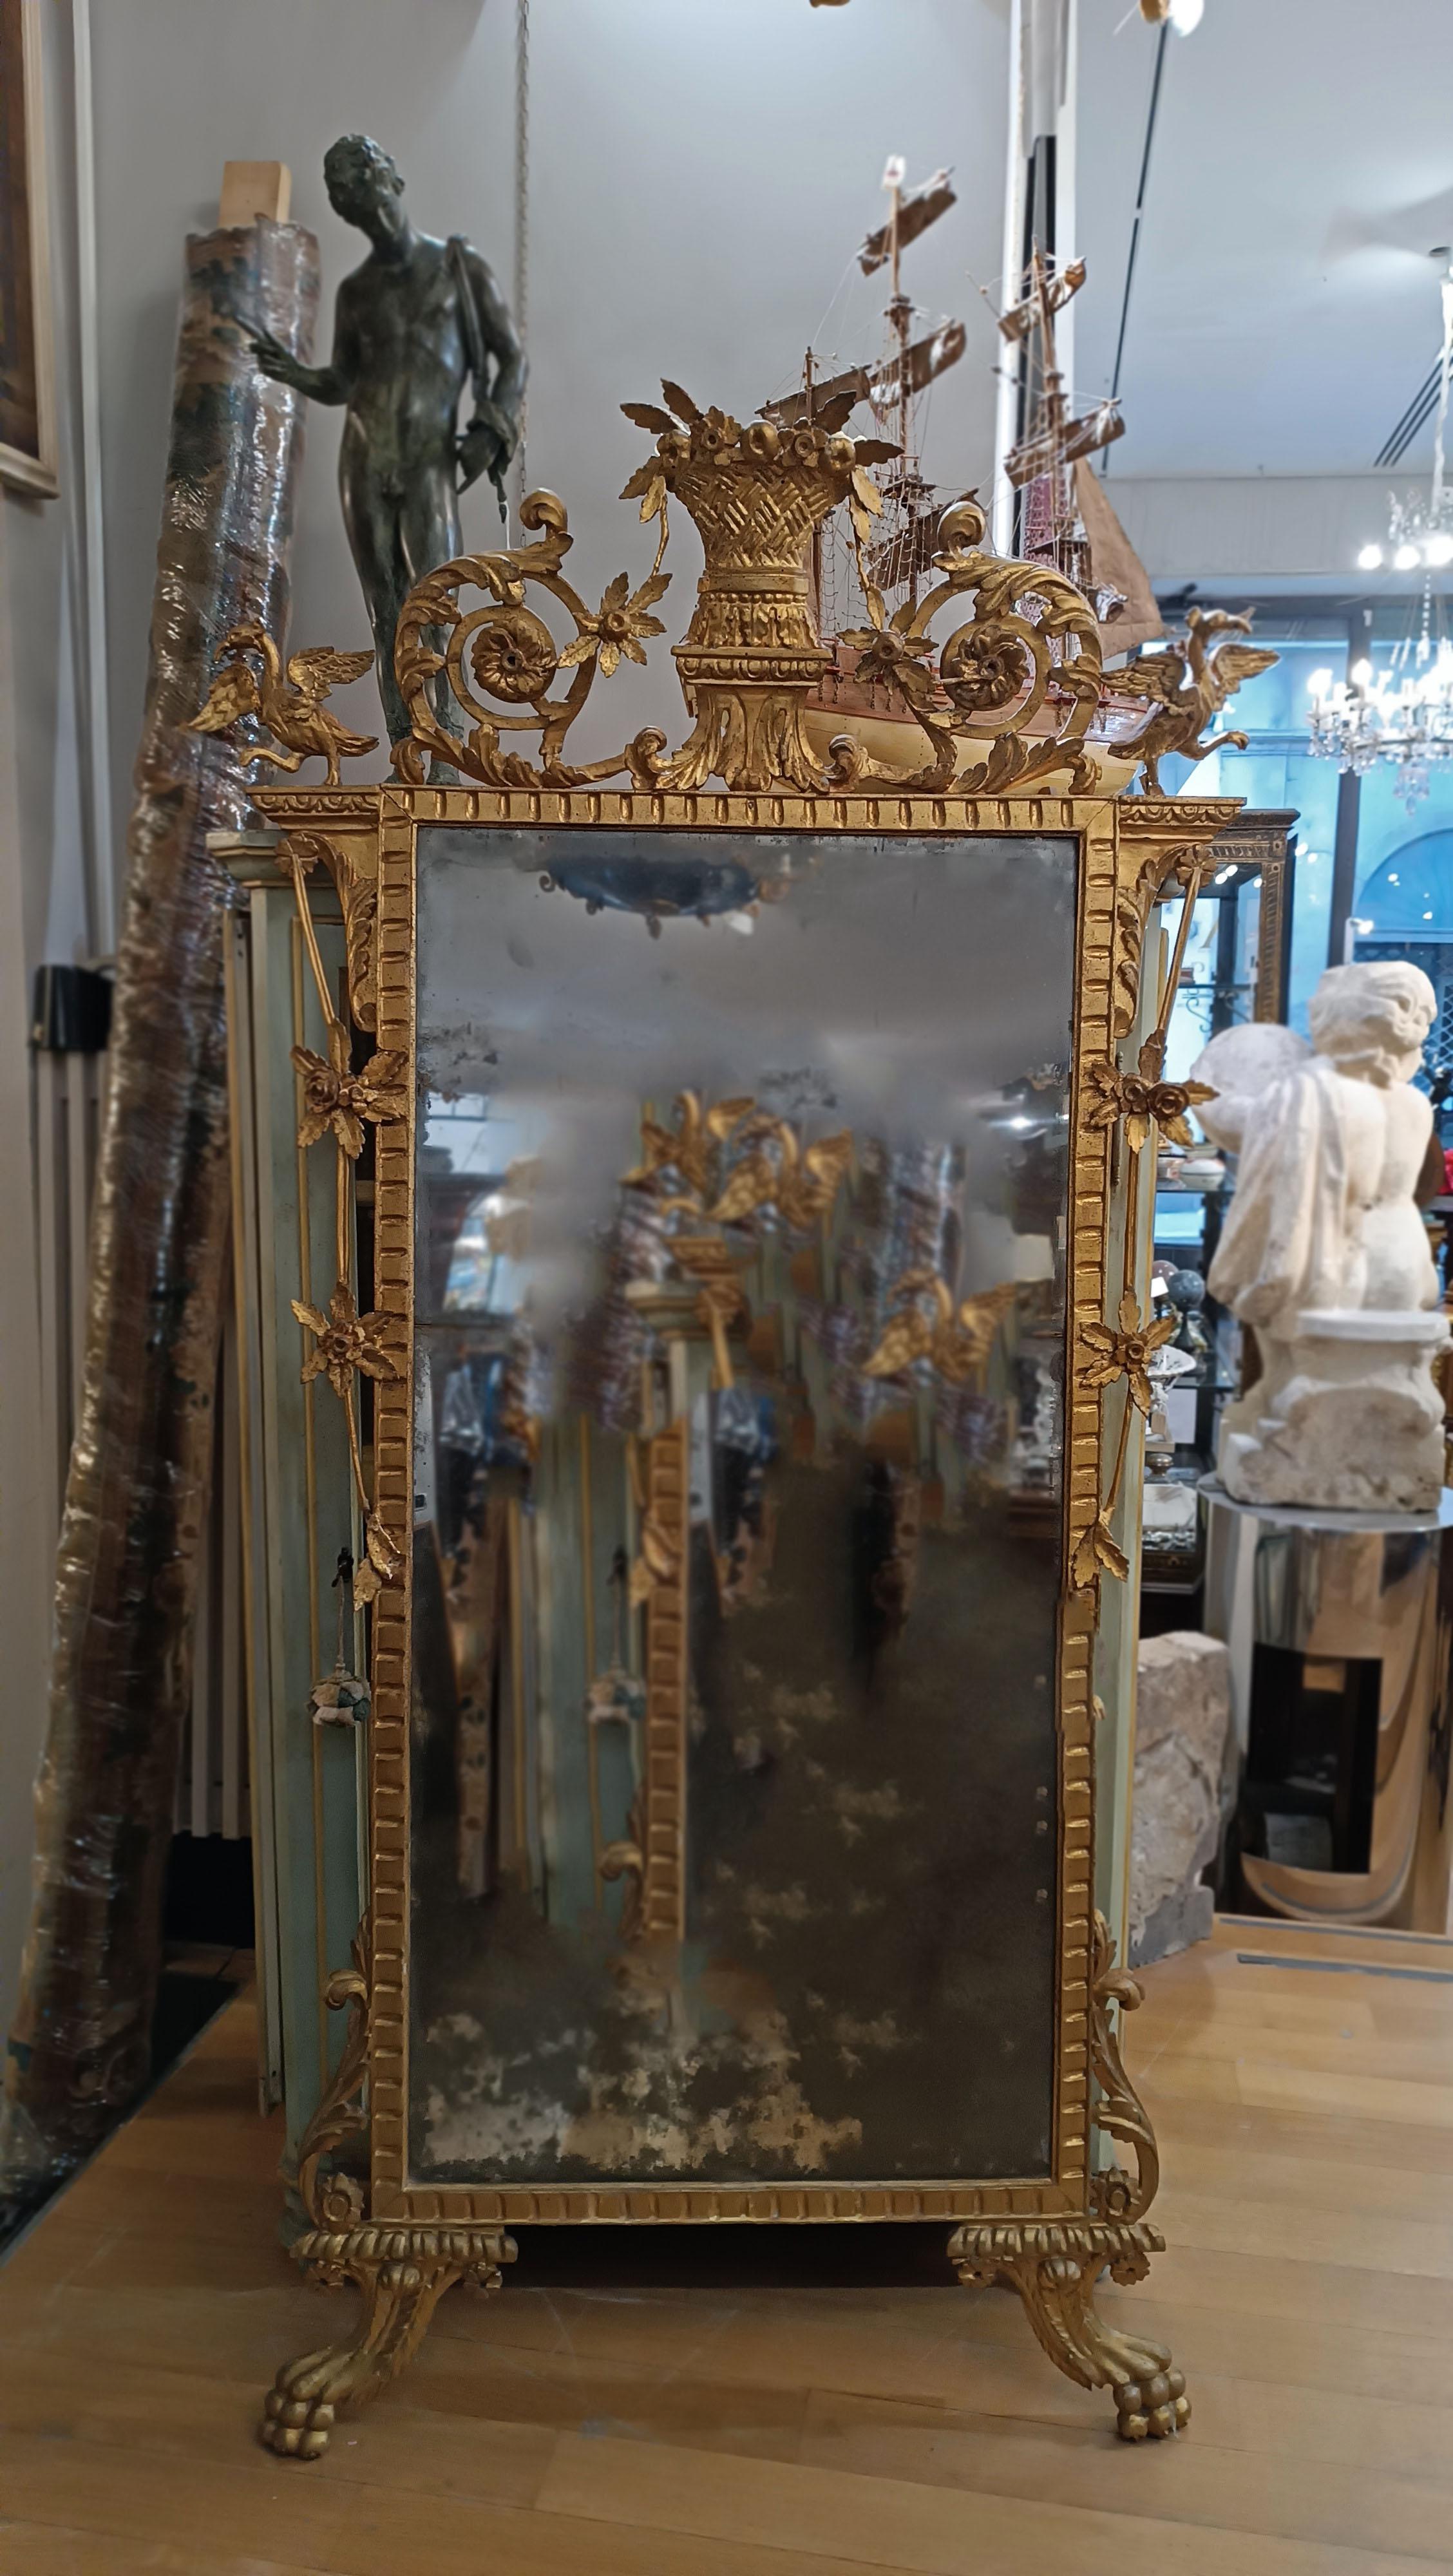 Elegant mirror made of carved pine wood and subsequently gilded with pure gold leaf. Made in Tuscany, probably in Lucca, its style is clearly Neoclassical and dates back to the end of the 18th century. The mirrors present are original and the rear